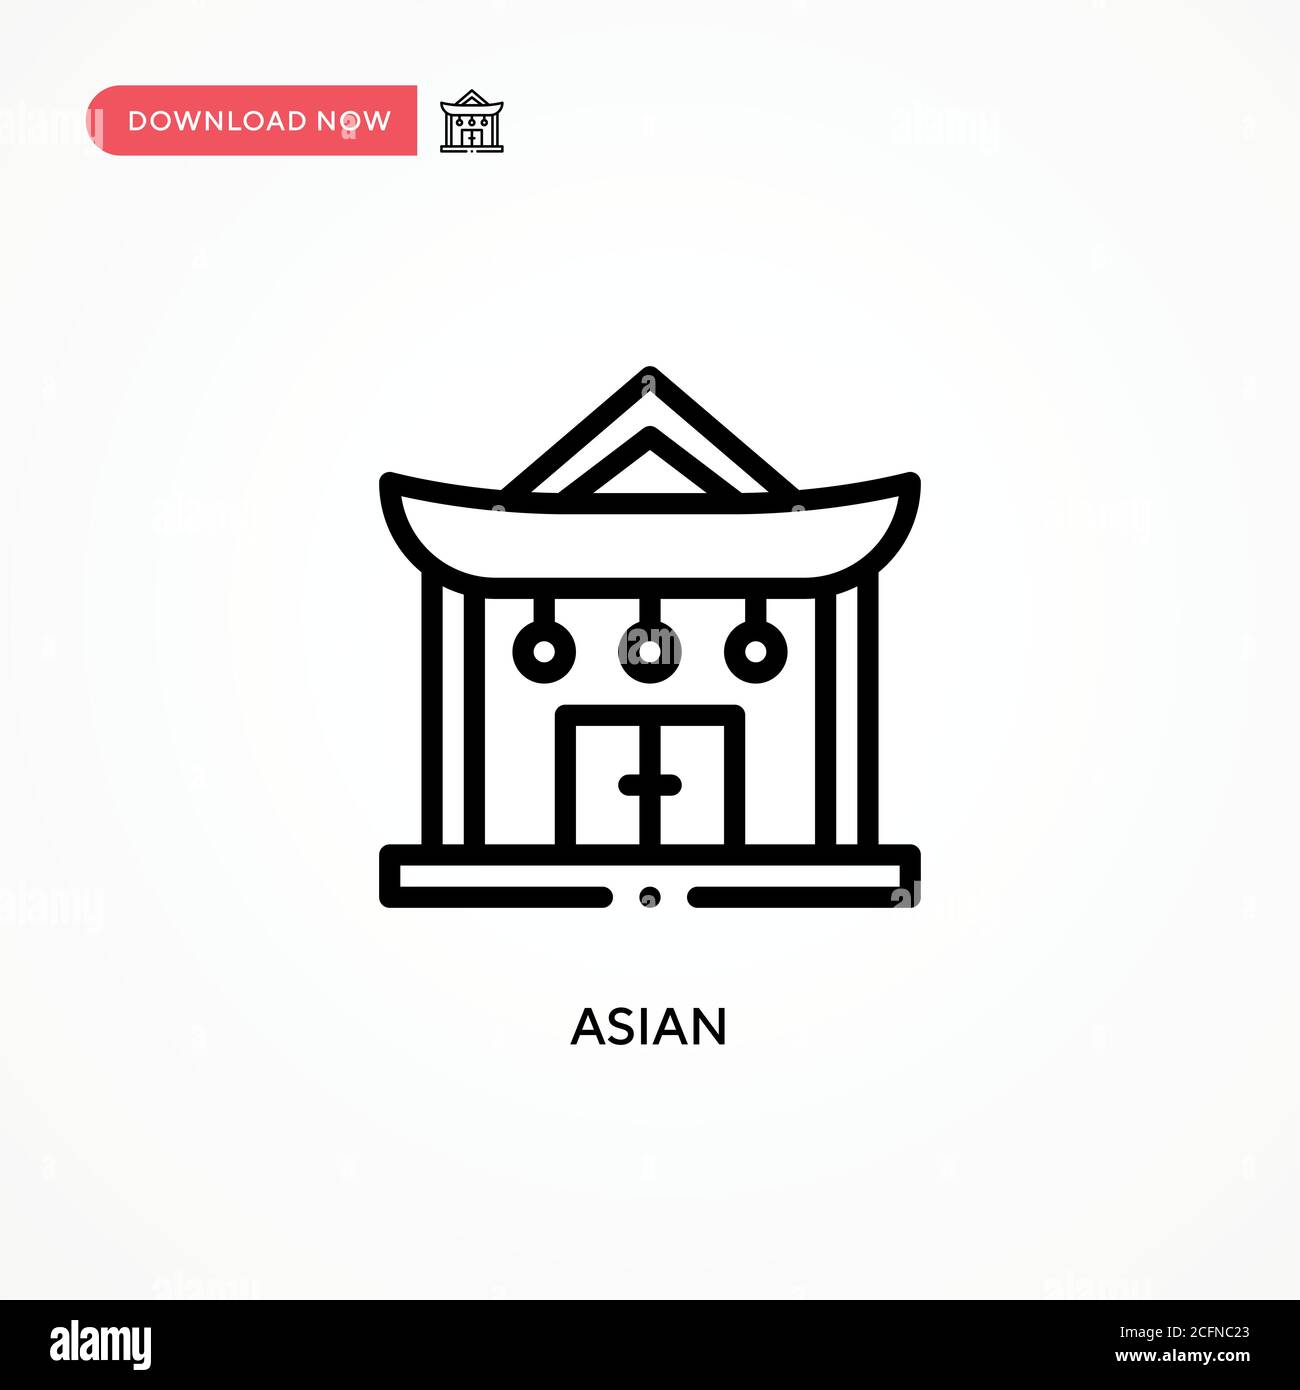 Asian vector icon. Modern, simple flat vector illustration for web site or mobile app Stock Vector